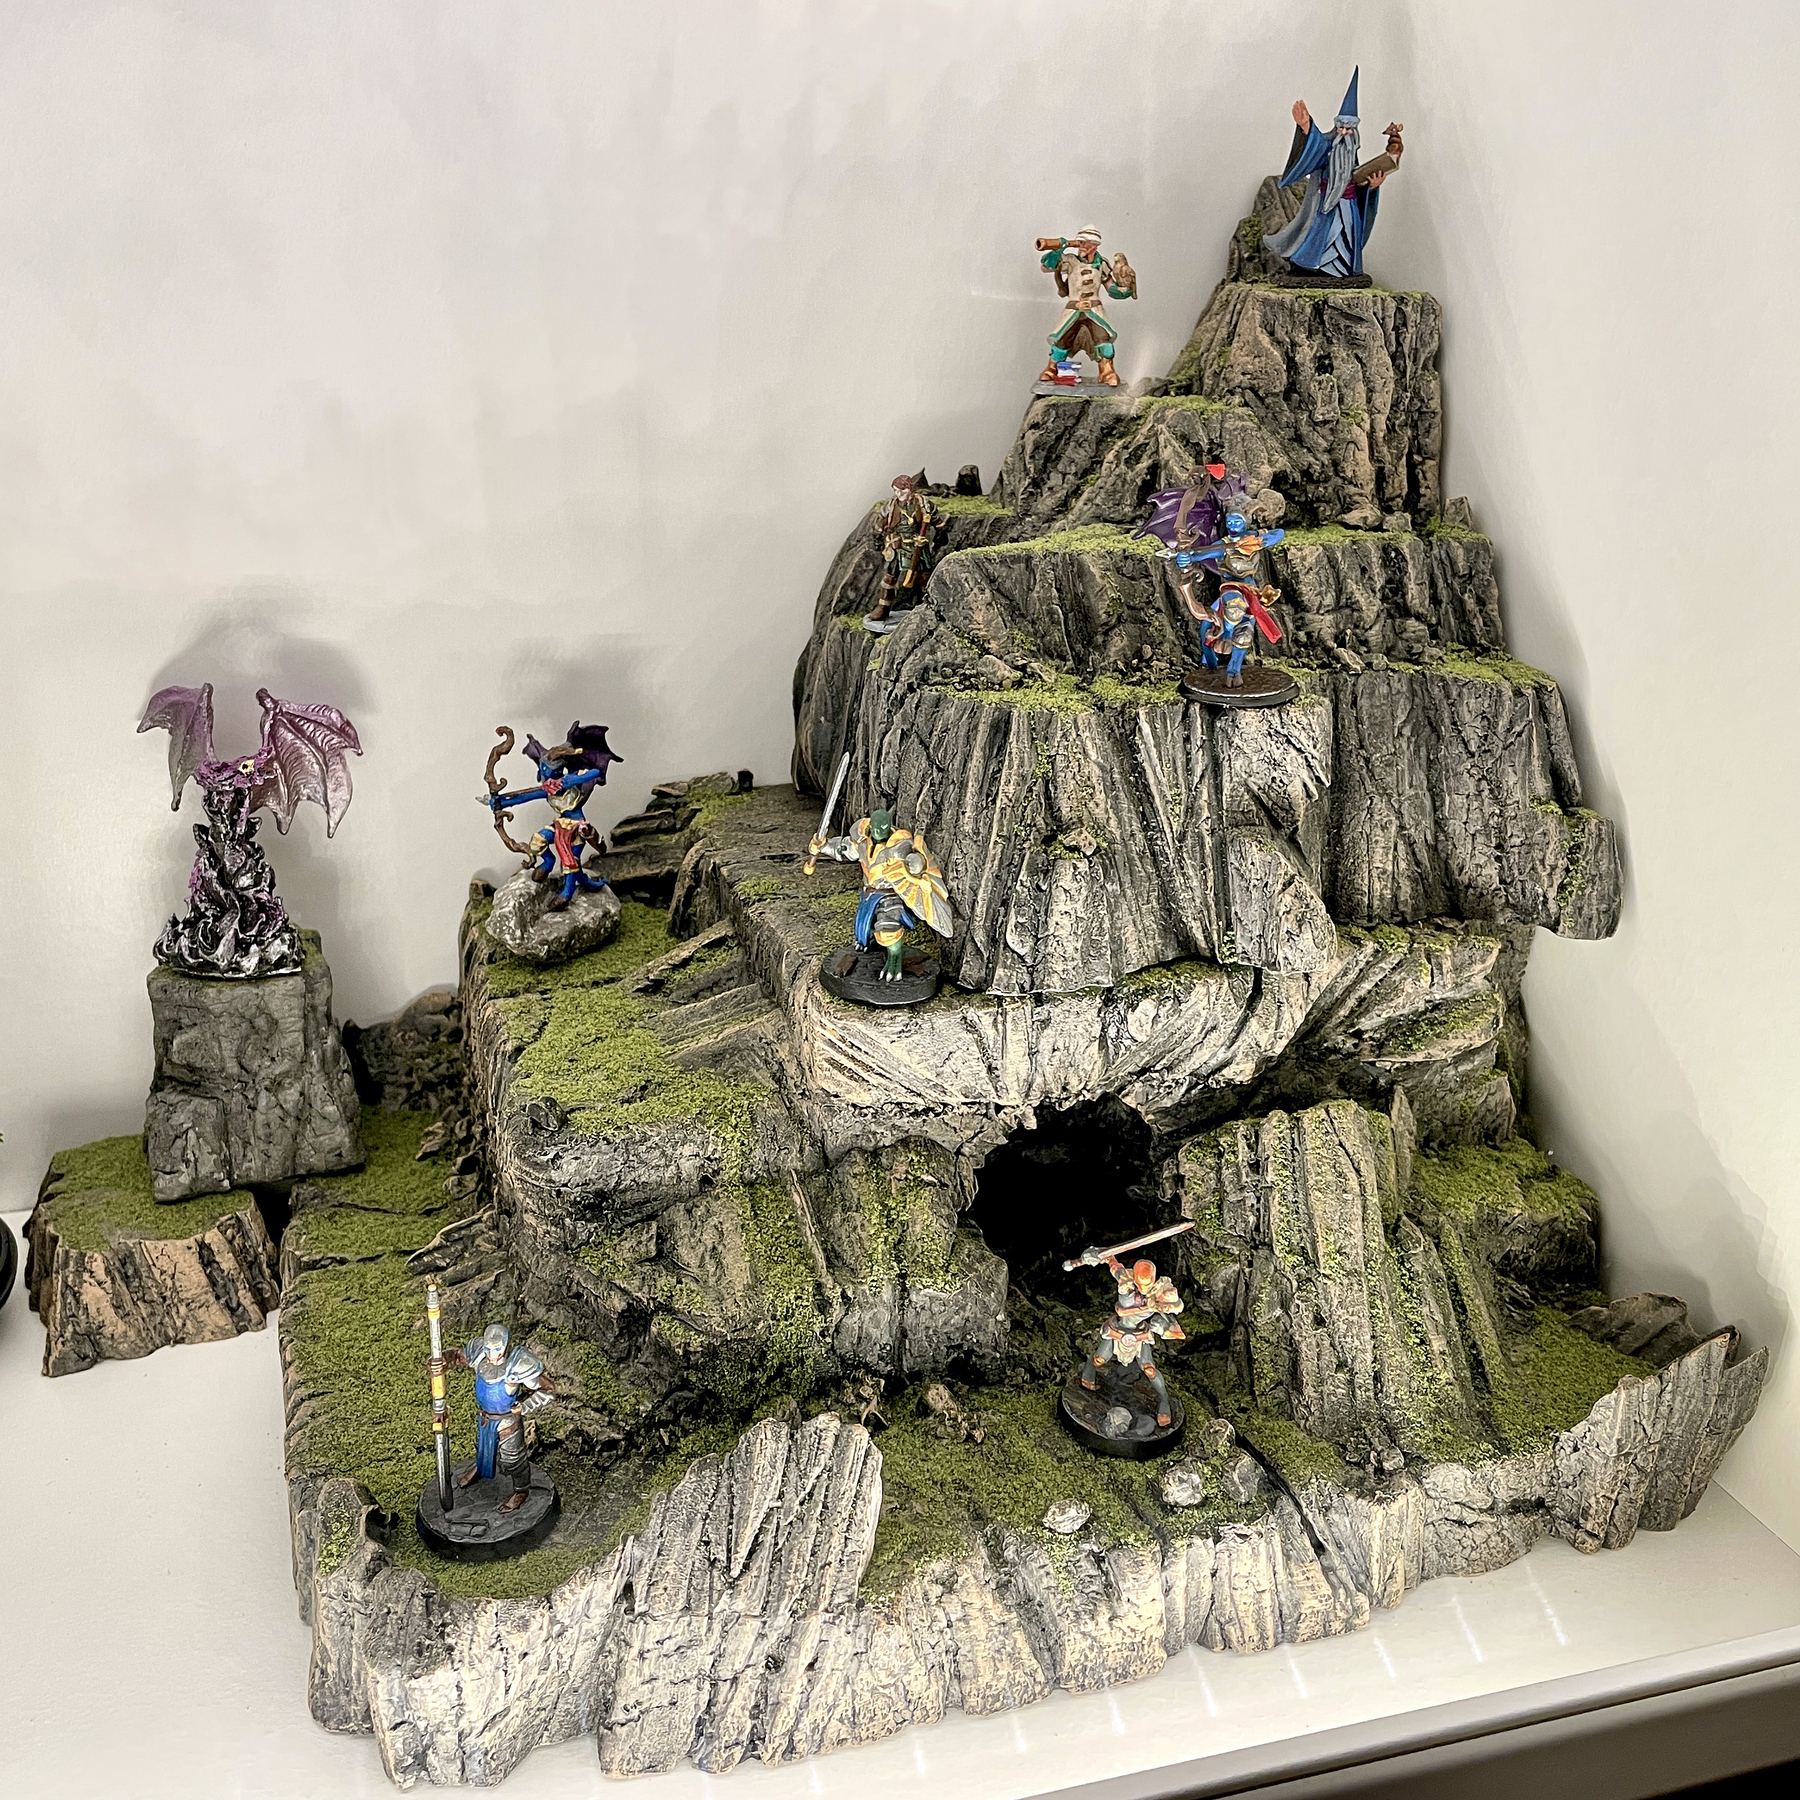 Painted Dungeons and Dragons figures standing on a handmade mountain model